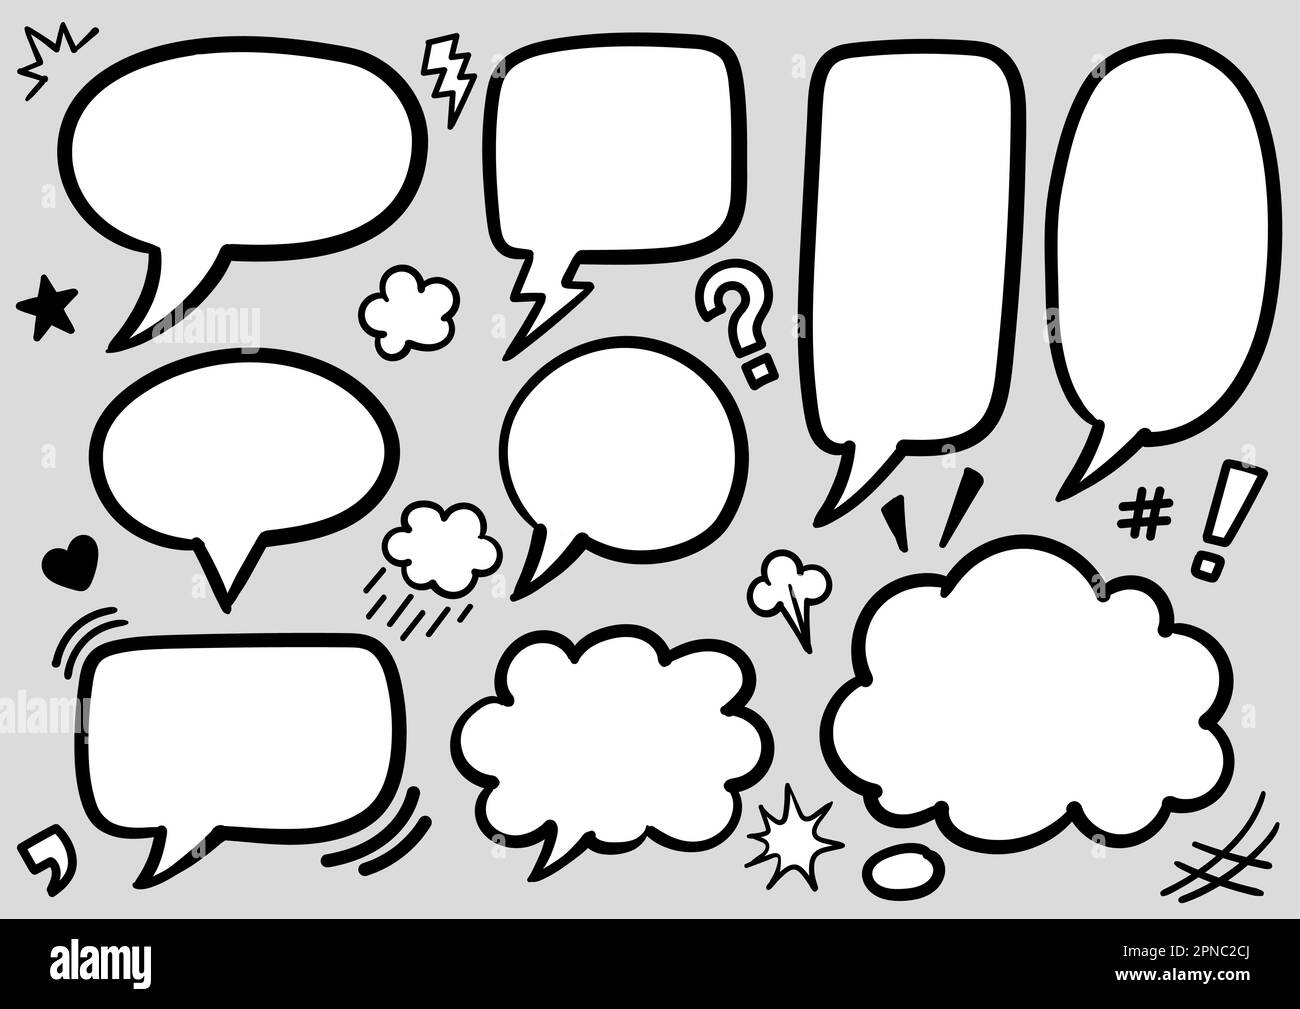 Isolated Freehand Handrawn Speech Bubbles And Signs For Cartooning, Comic, And Doodling Design. Premium Vector Stock Vector